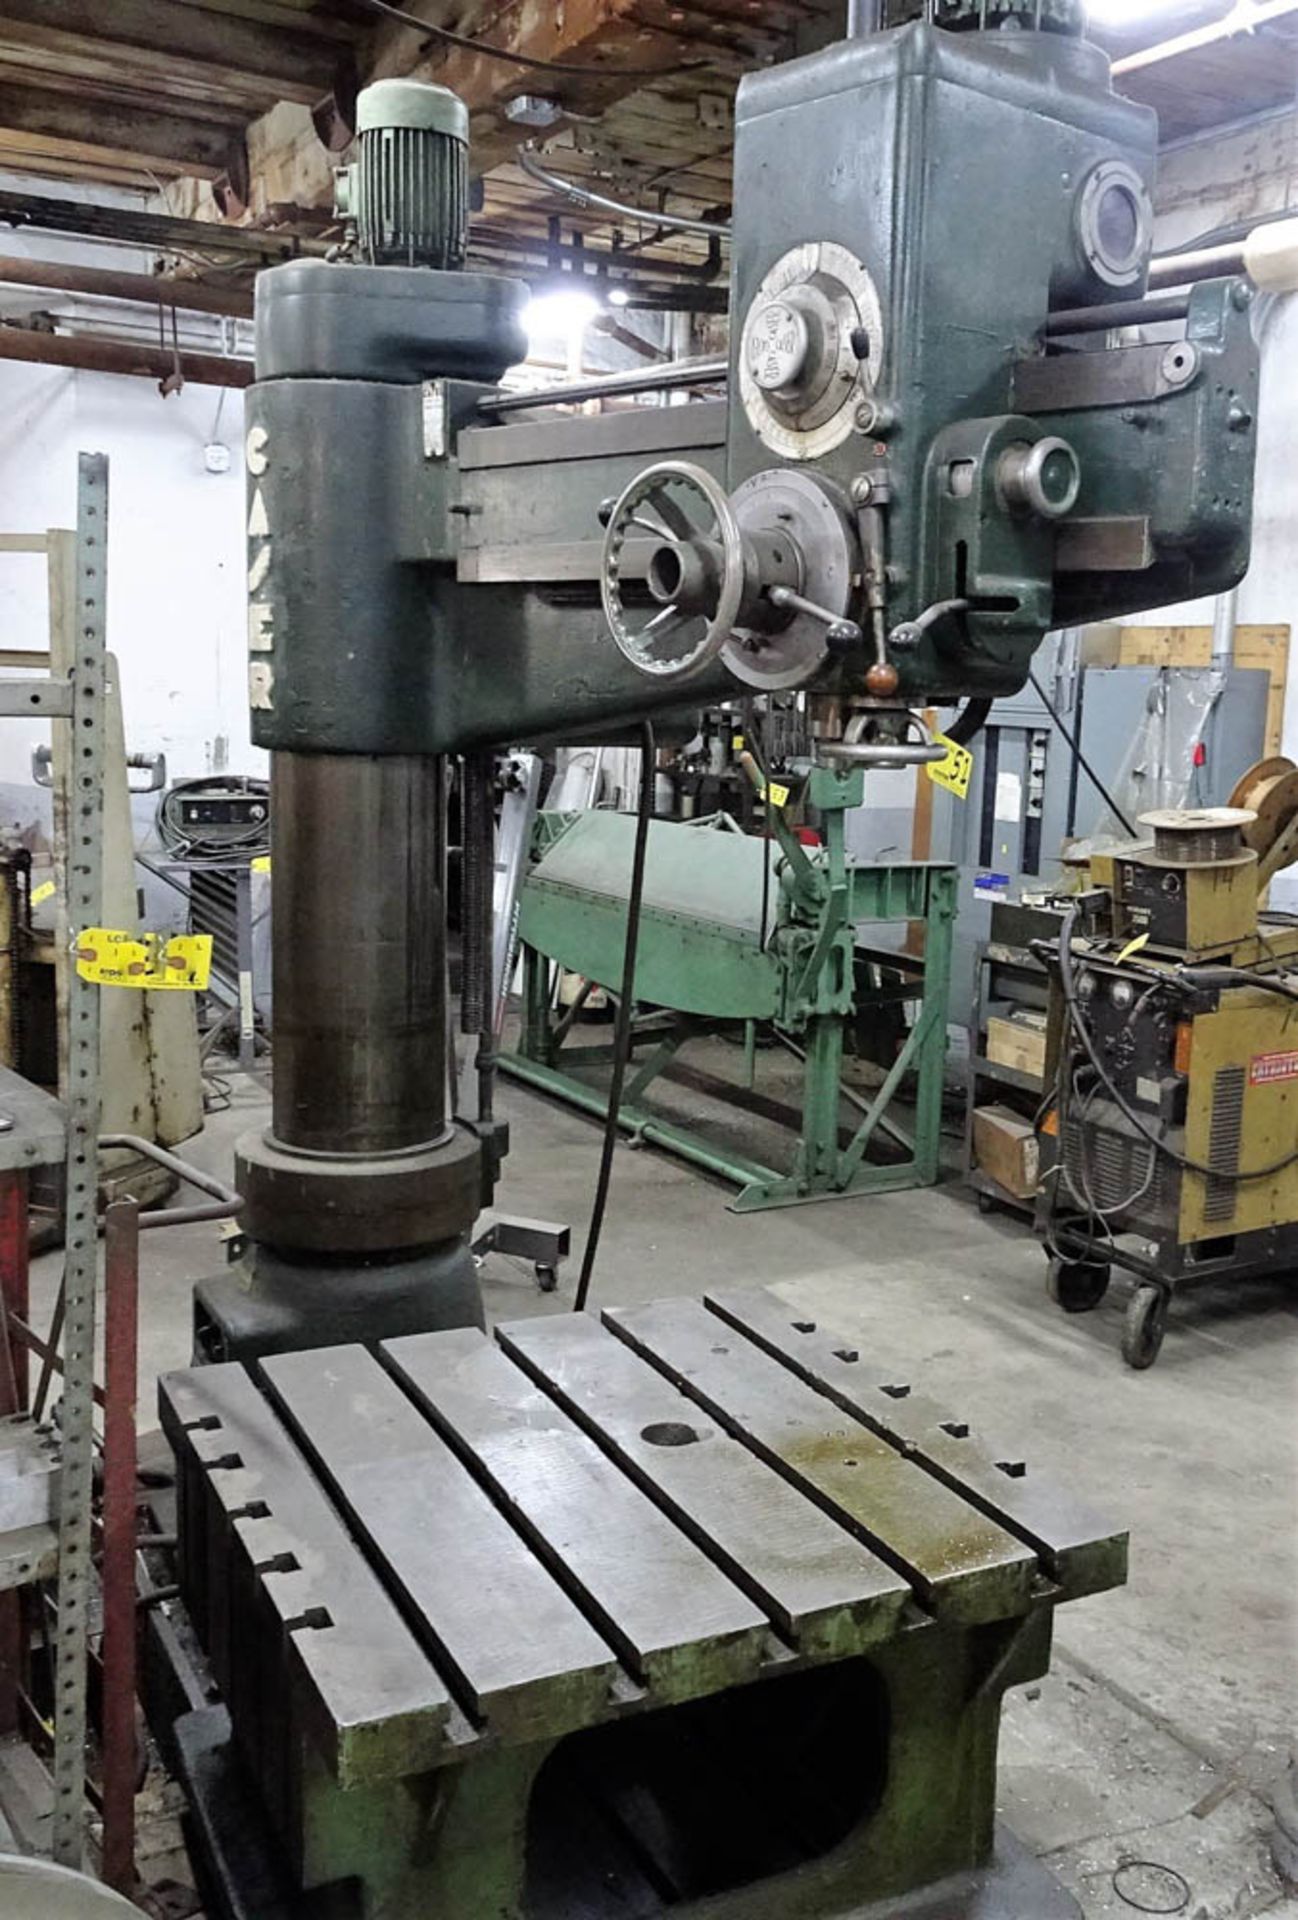 CASER MDL. 35-1250 RADIAL ARM DRILL WITH 36" X 36" T-SLOT RISER TABLE, APPROXIMATELY 48" TRAVEL, 12"